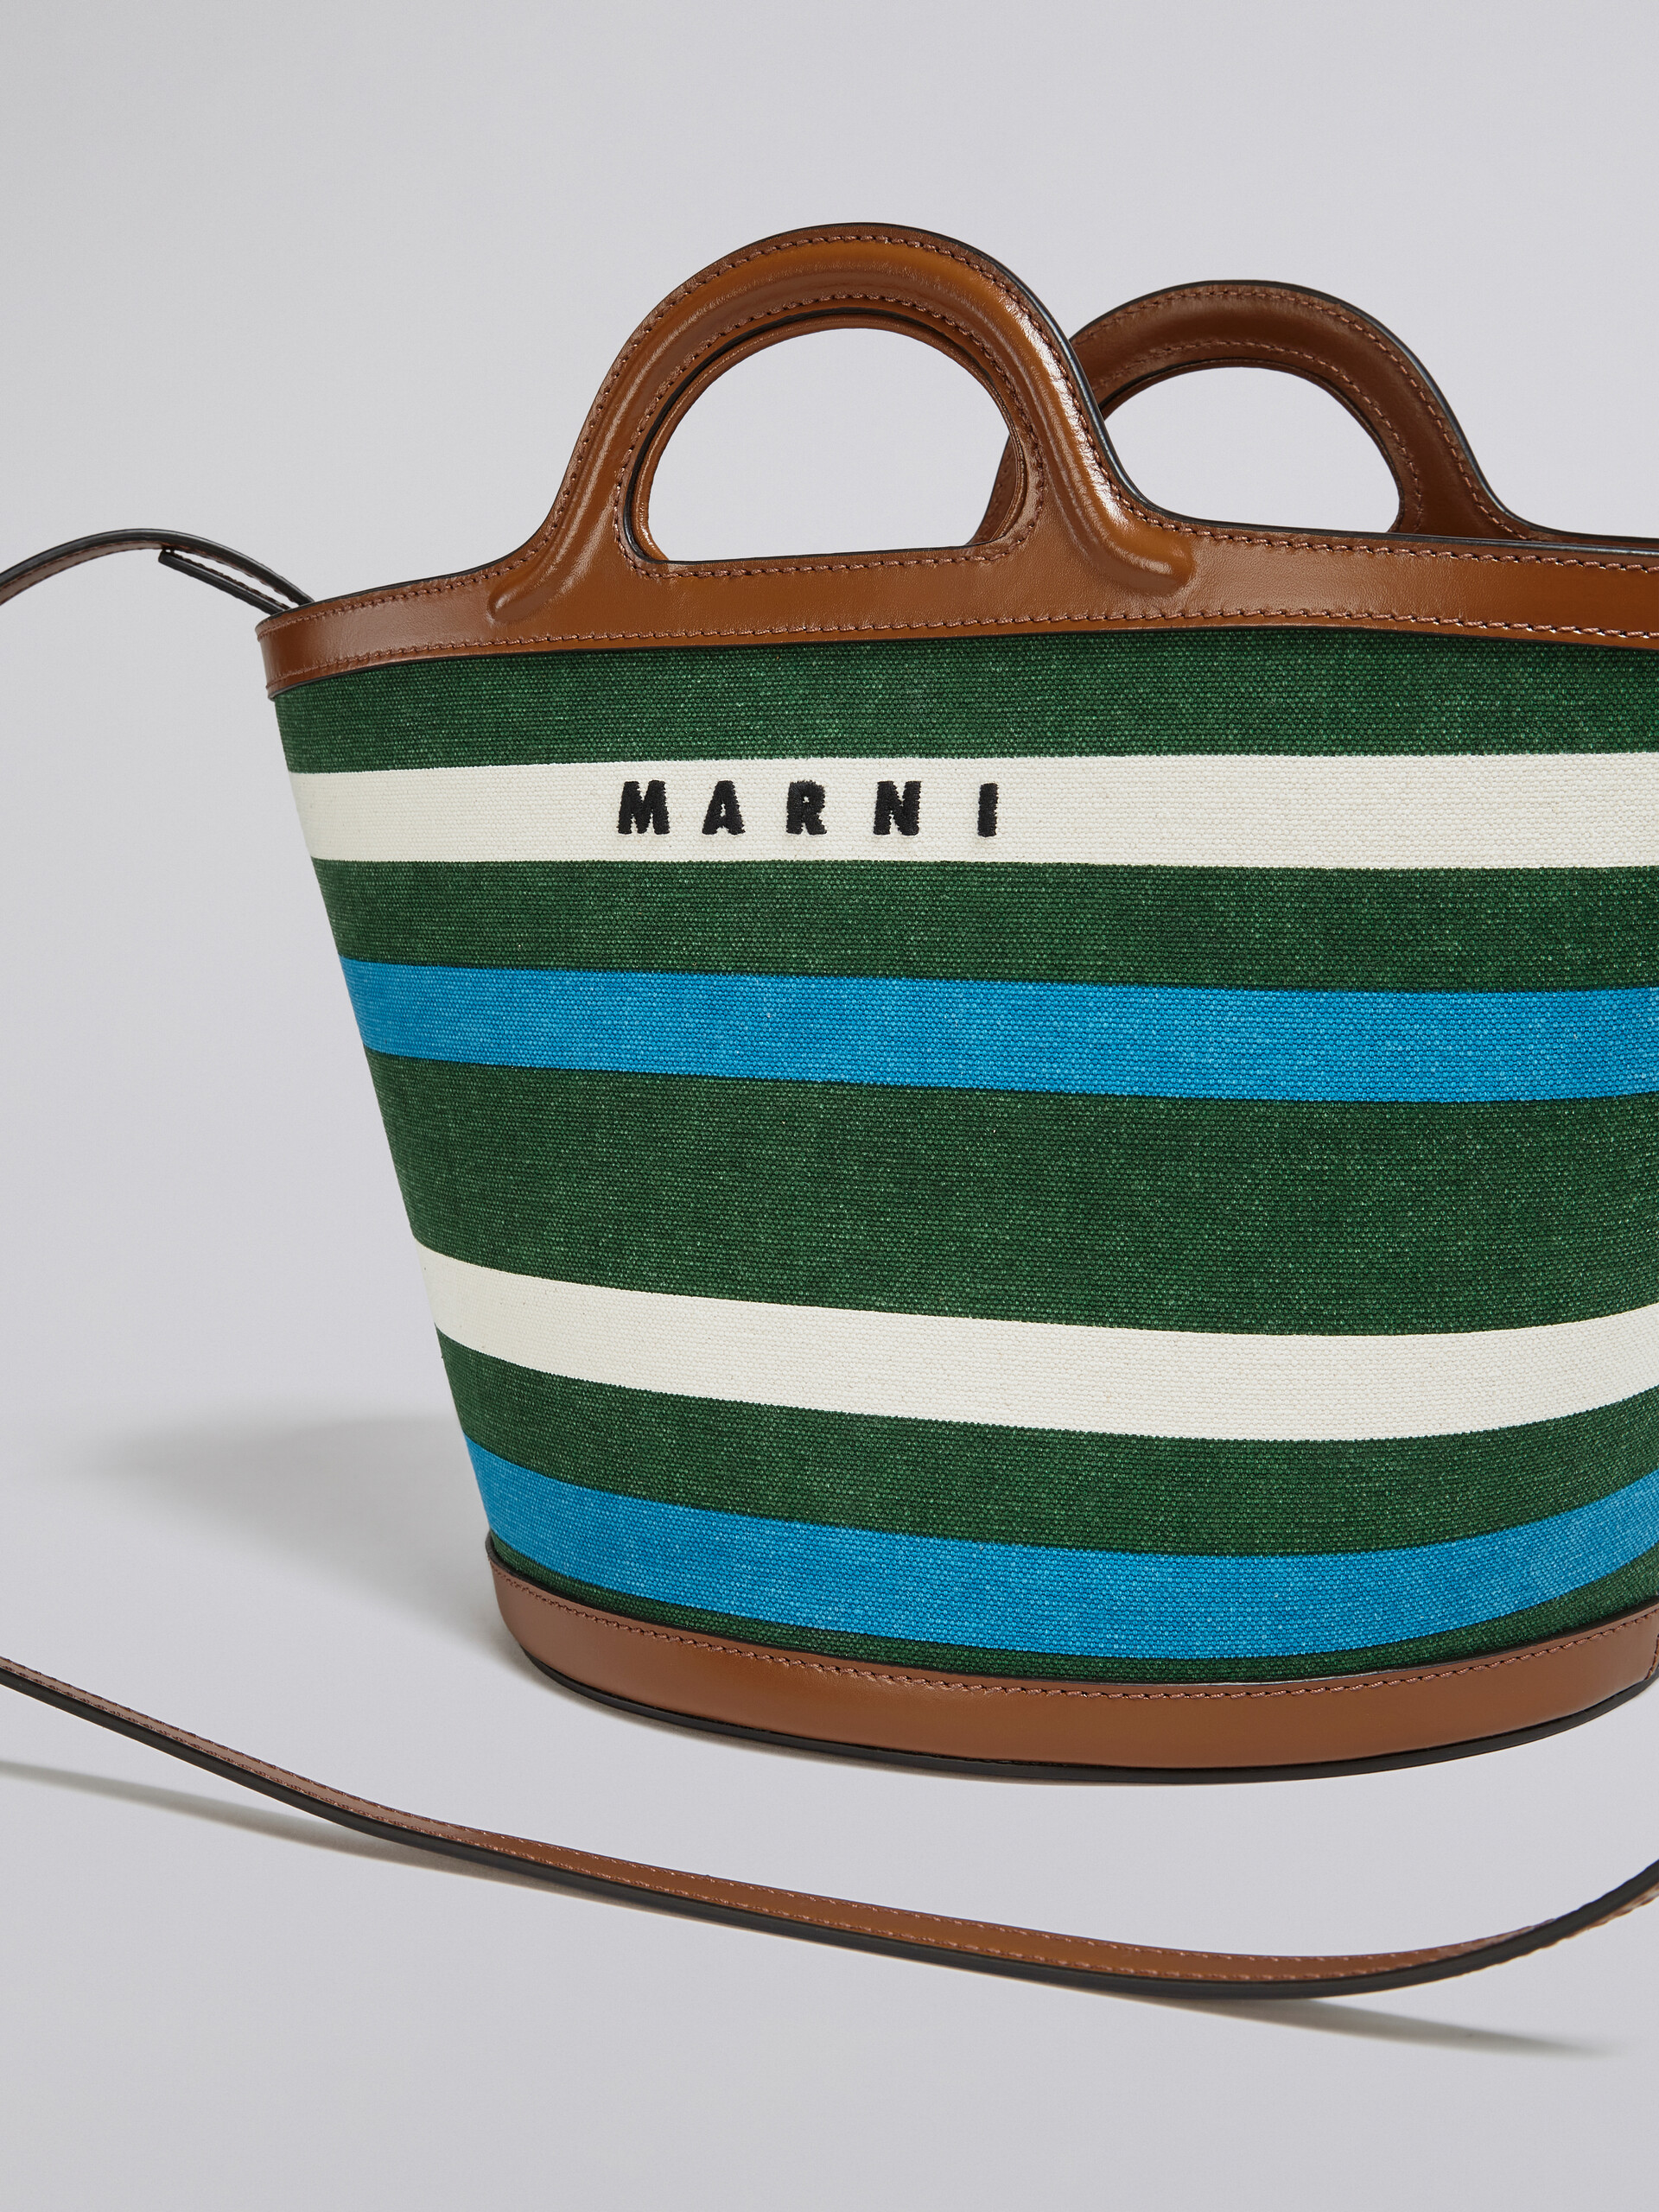 TROPICALIA small bag in leather and striped canvas - Handbag - Image 5